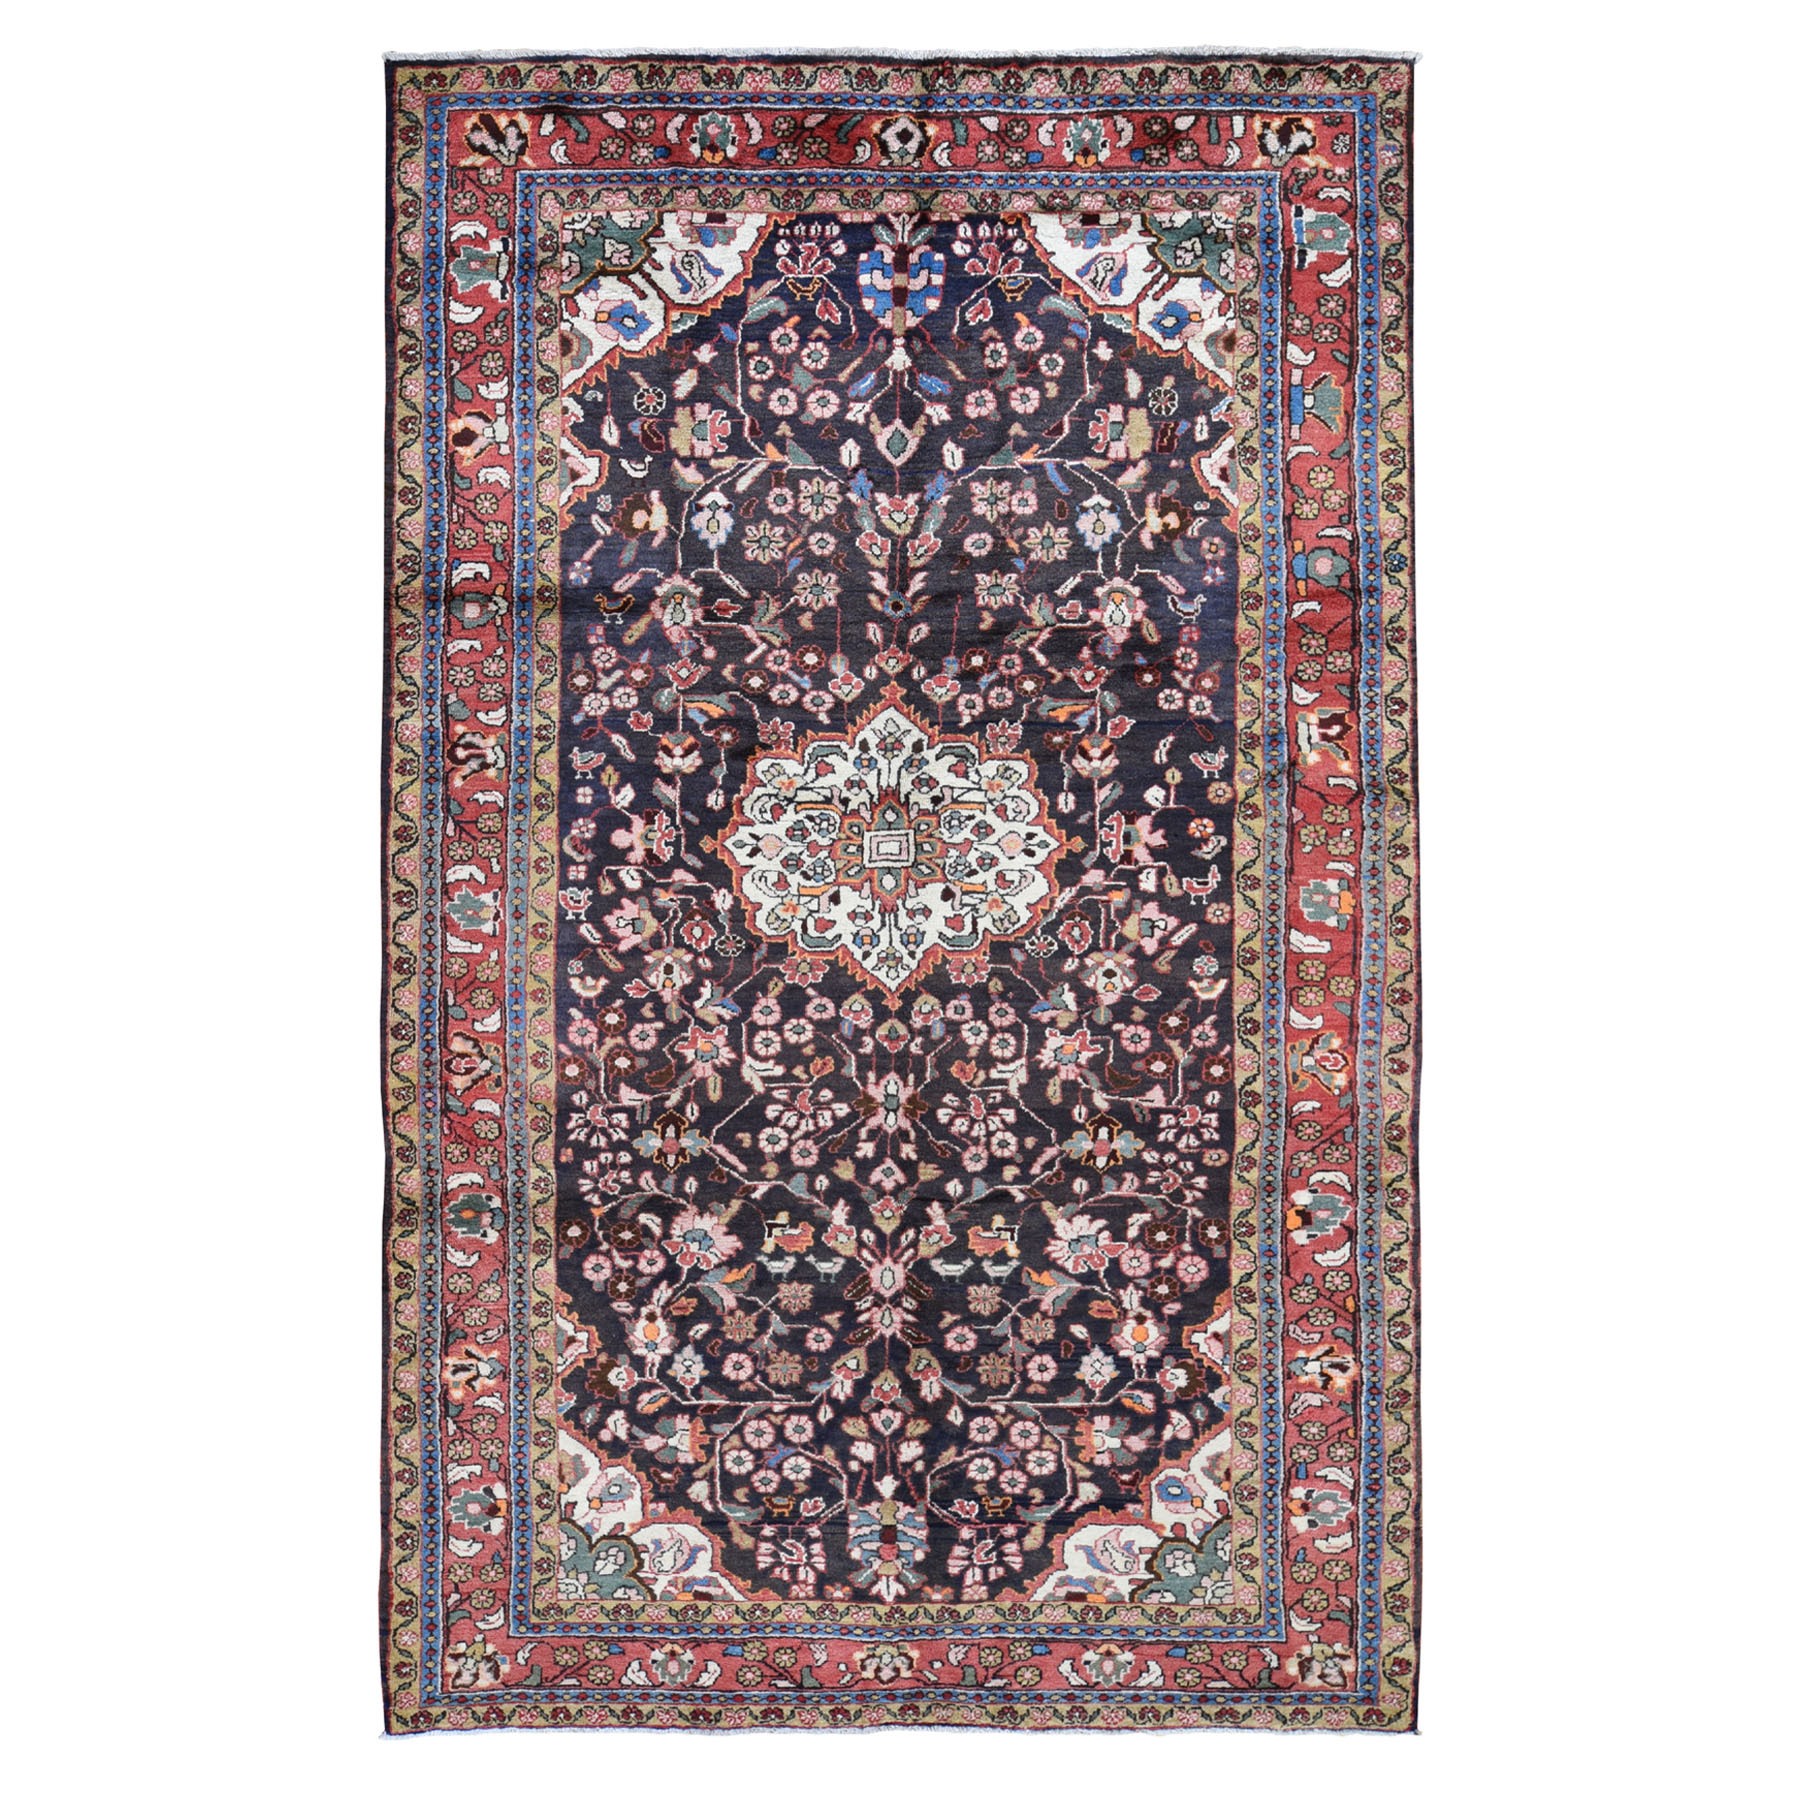 6'X11' Gallery Size Red Vintage Persian Lilahan Pure Wool Hand-Knotted Oriental Rug moad7e06